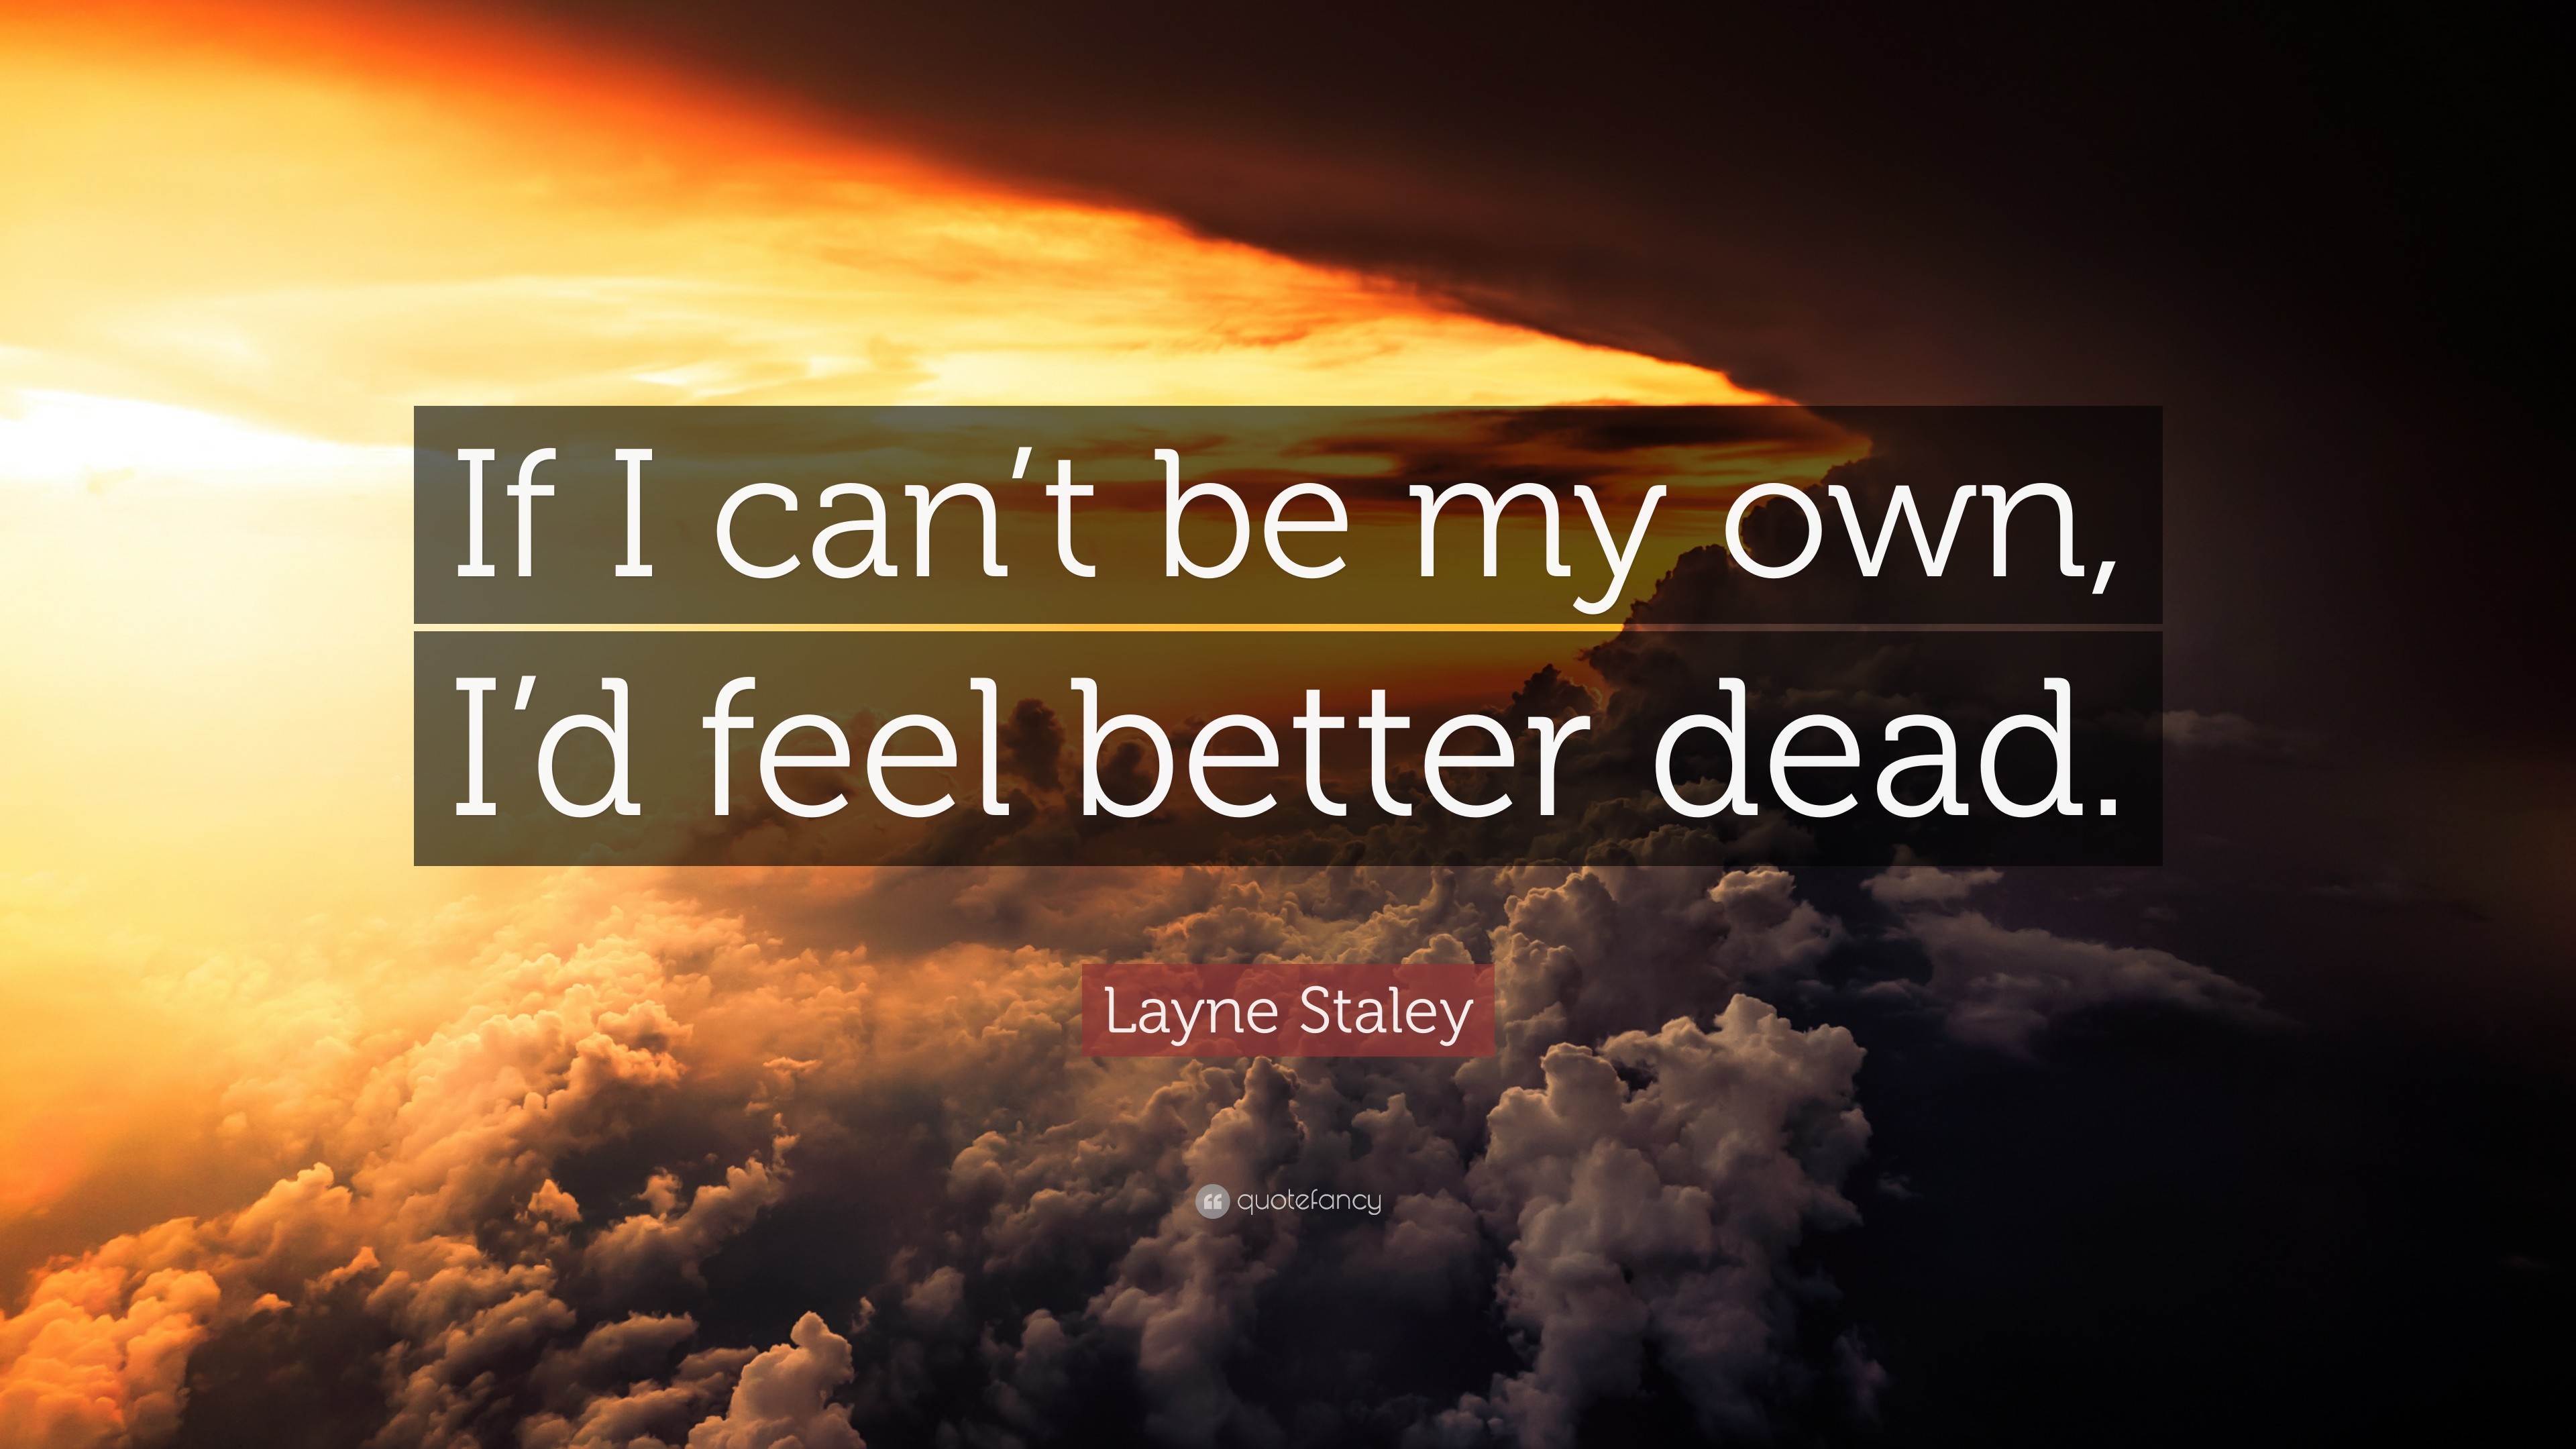 3840x2160 Layne Staley Quote: “If I can't be my own, I'